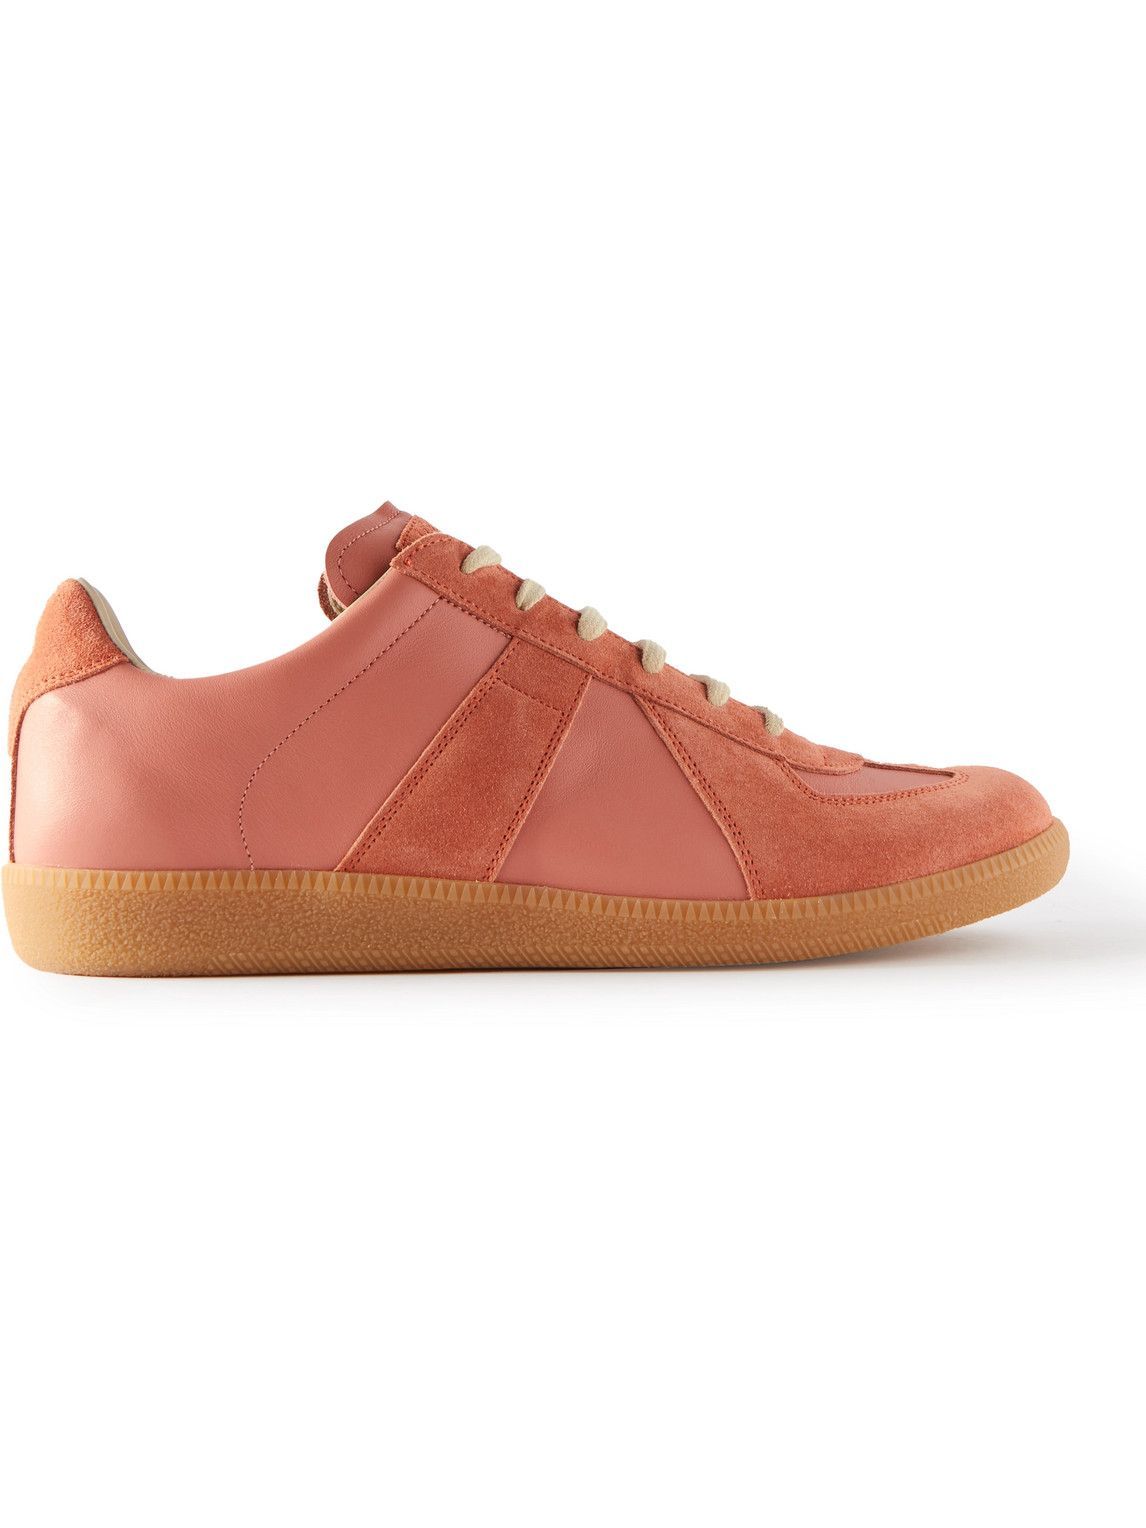 Maison Margiela - Replica Leather and Suede Sneakers - Pink Maison Margiela